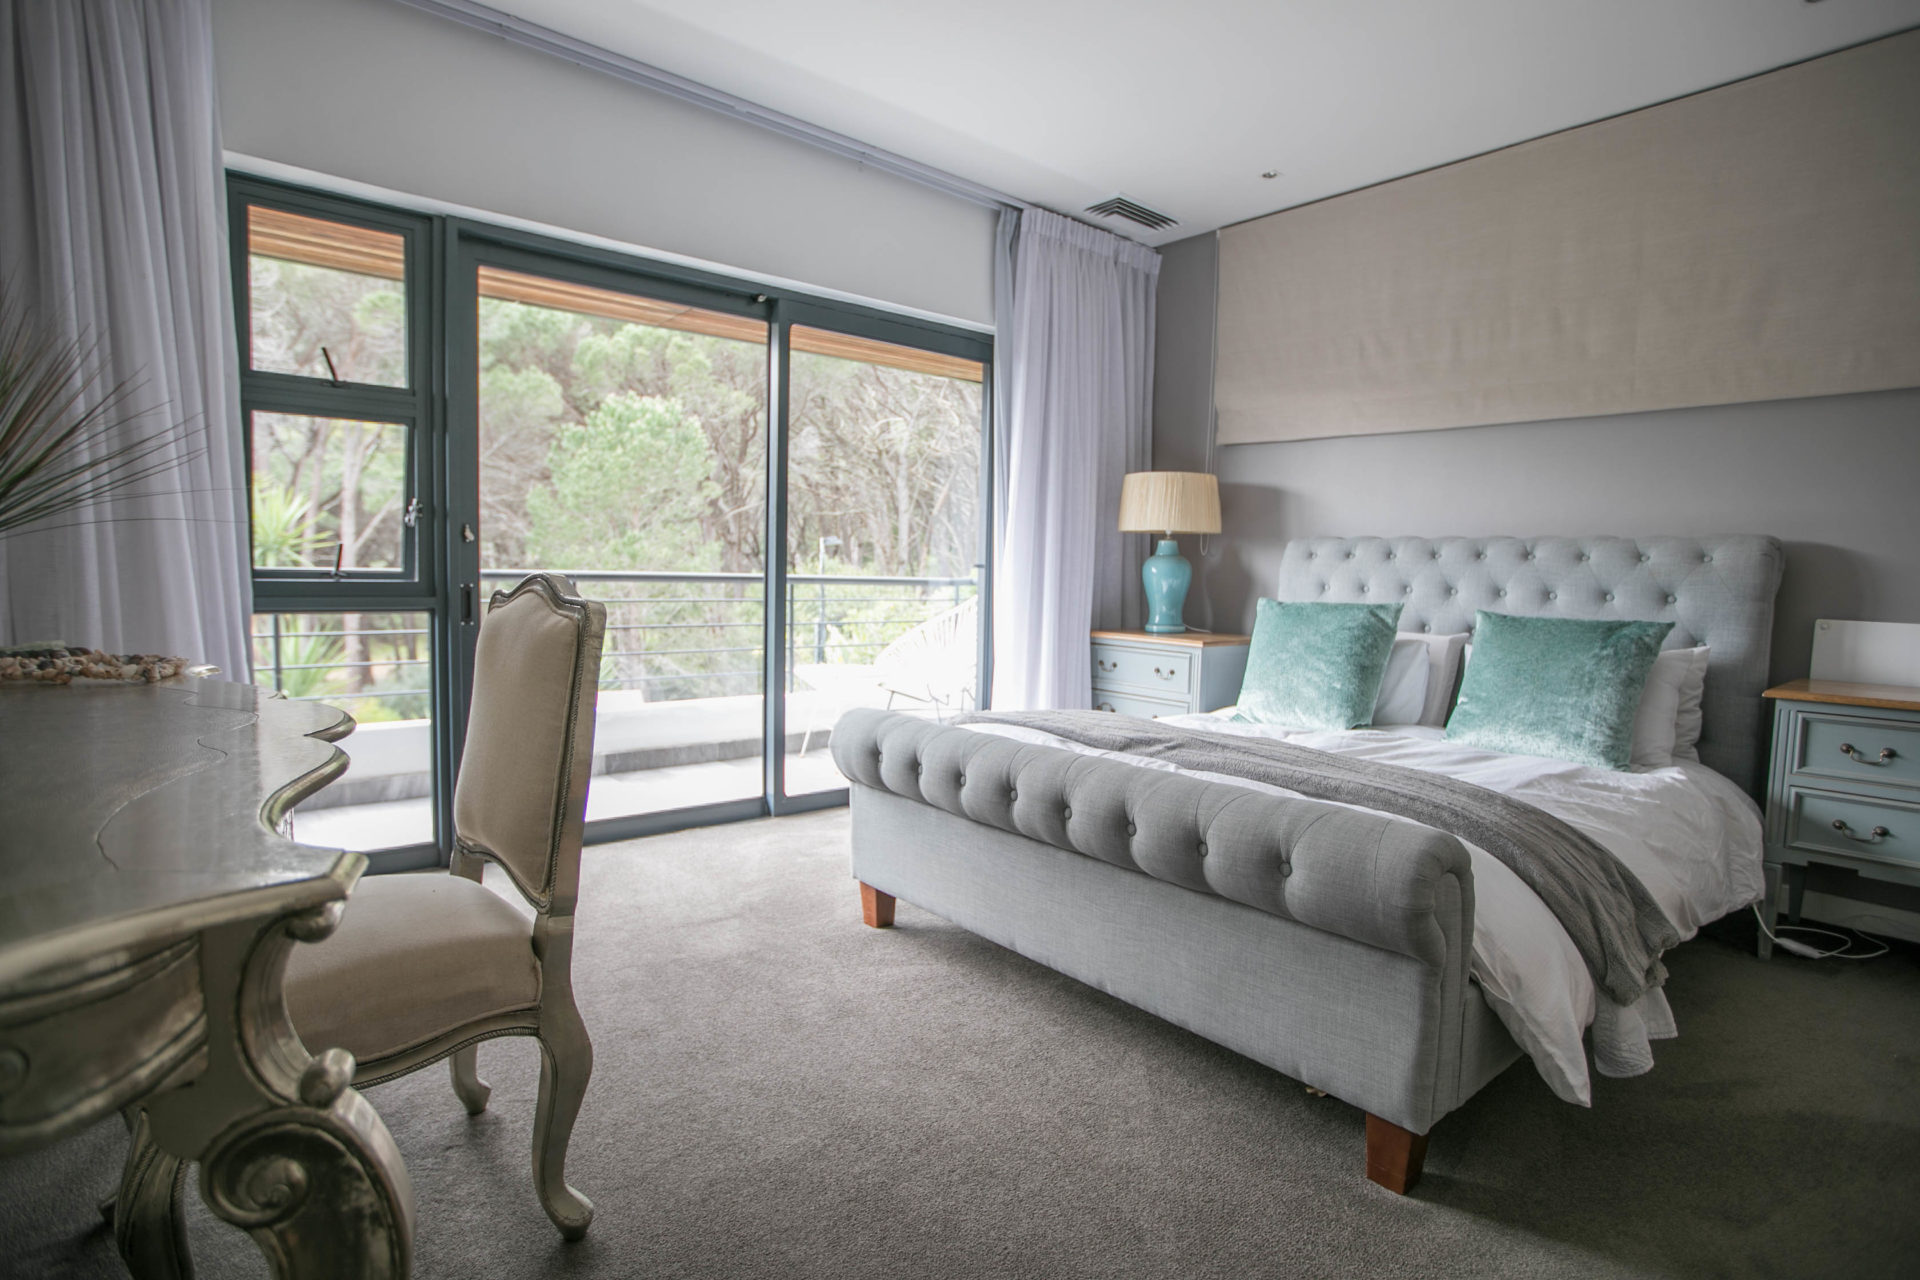 Photo 5 of Glen Hideaway accommodation in Camps Bay, Cape Town with 6 bedrooms and 6 bathrooms